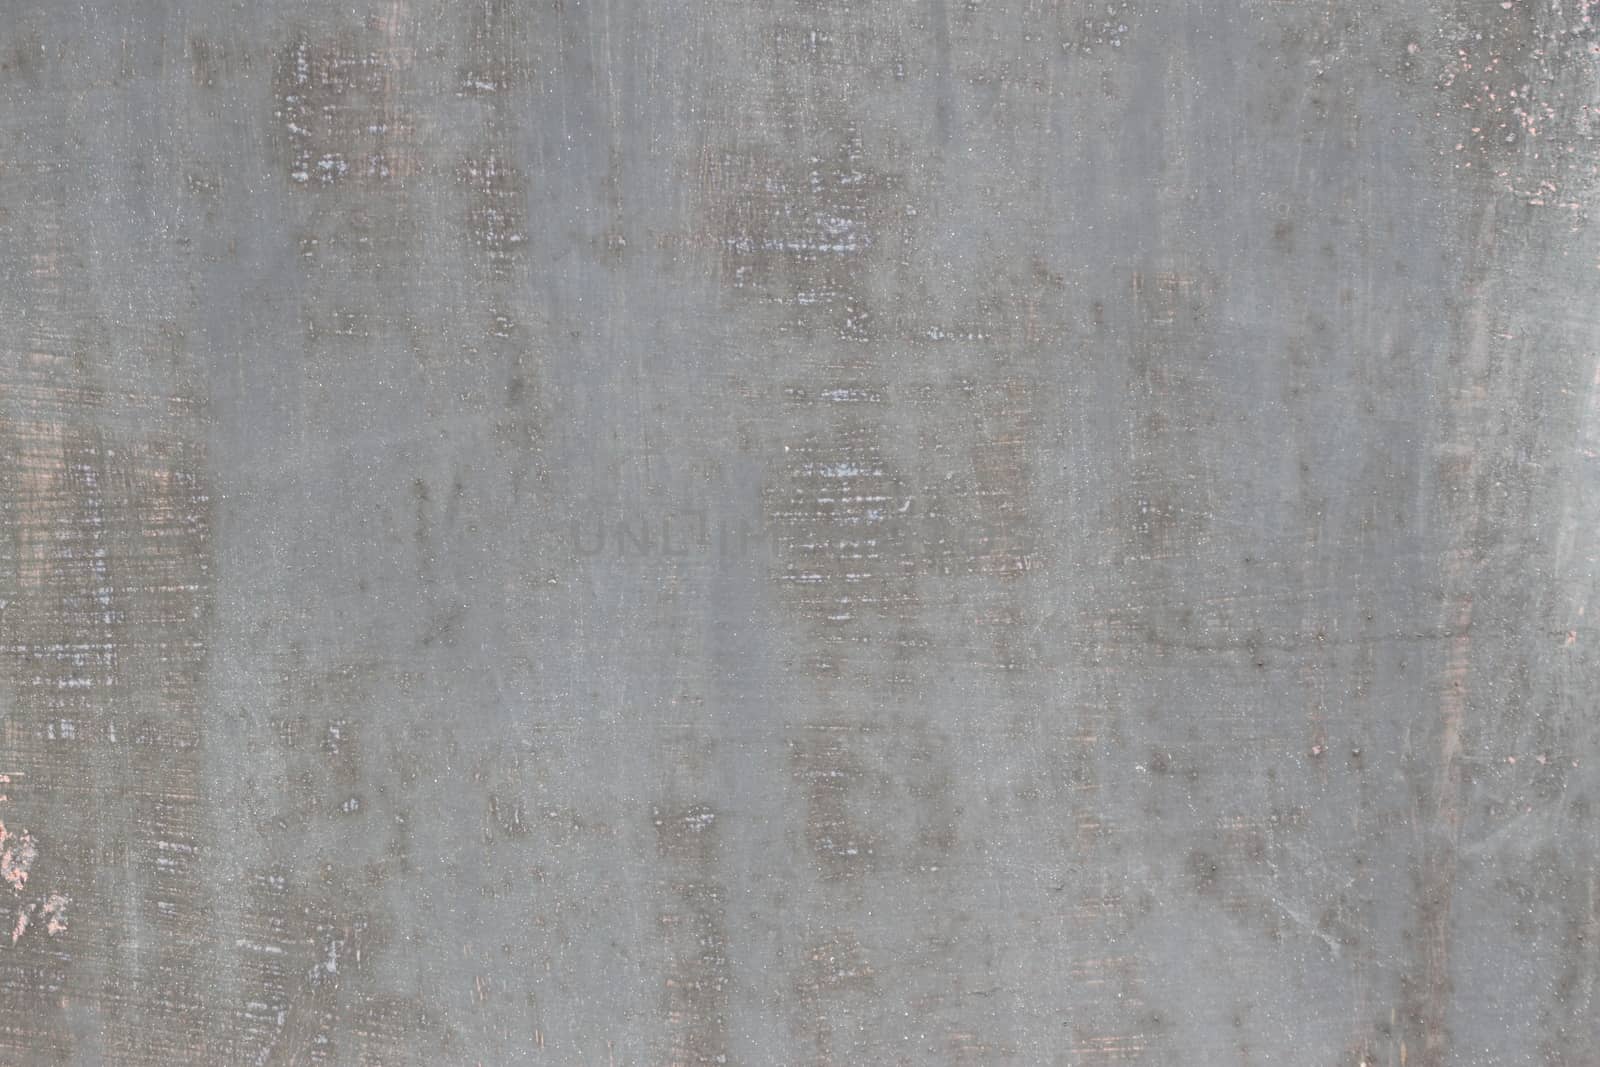 scratched gray metal surface by Chechotkin